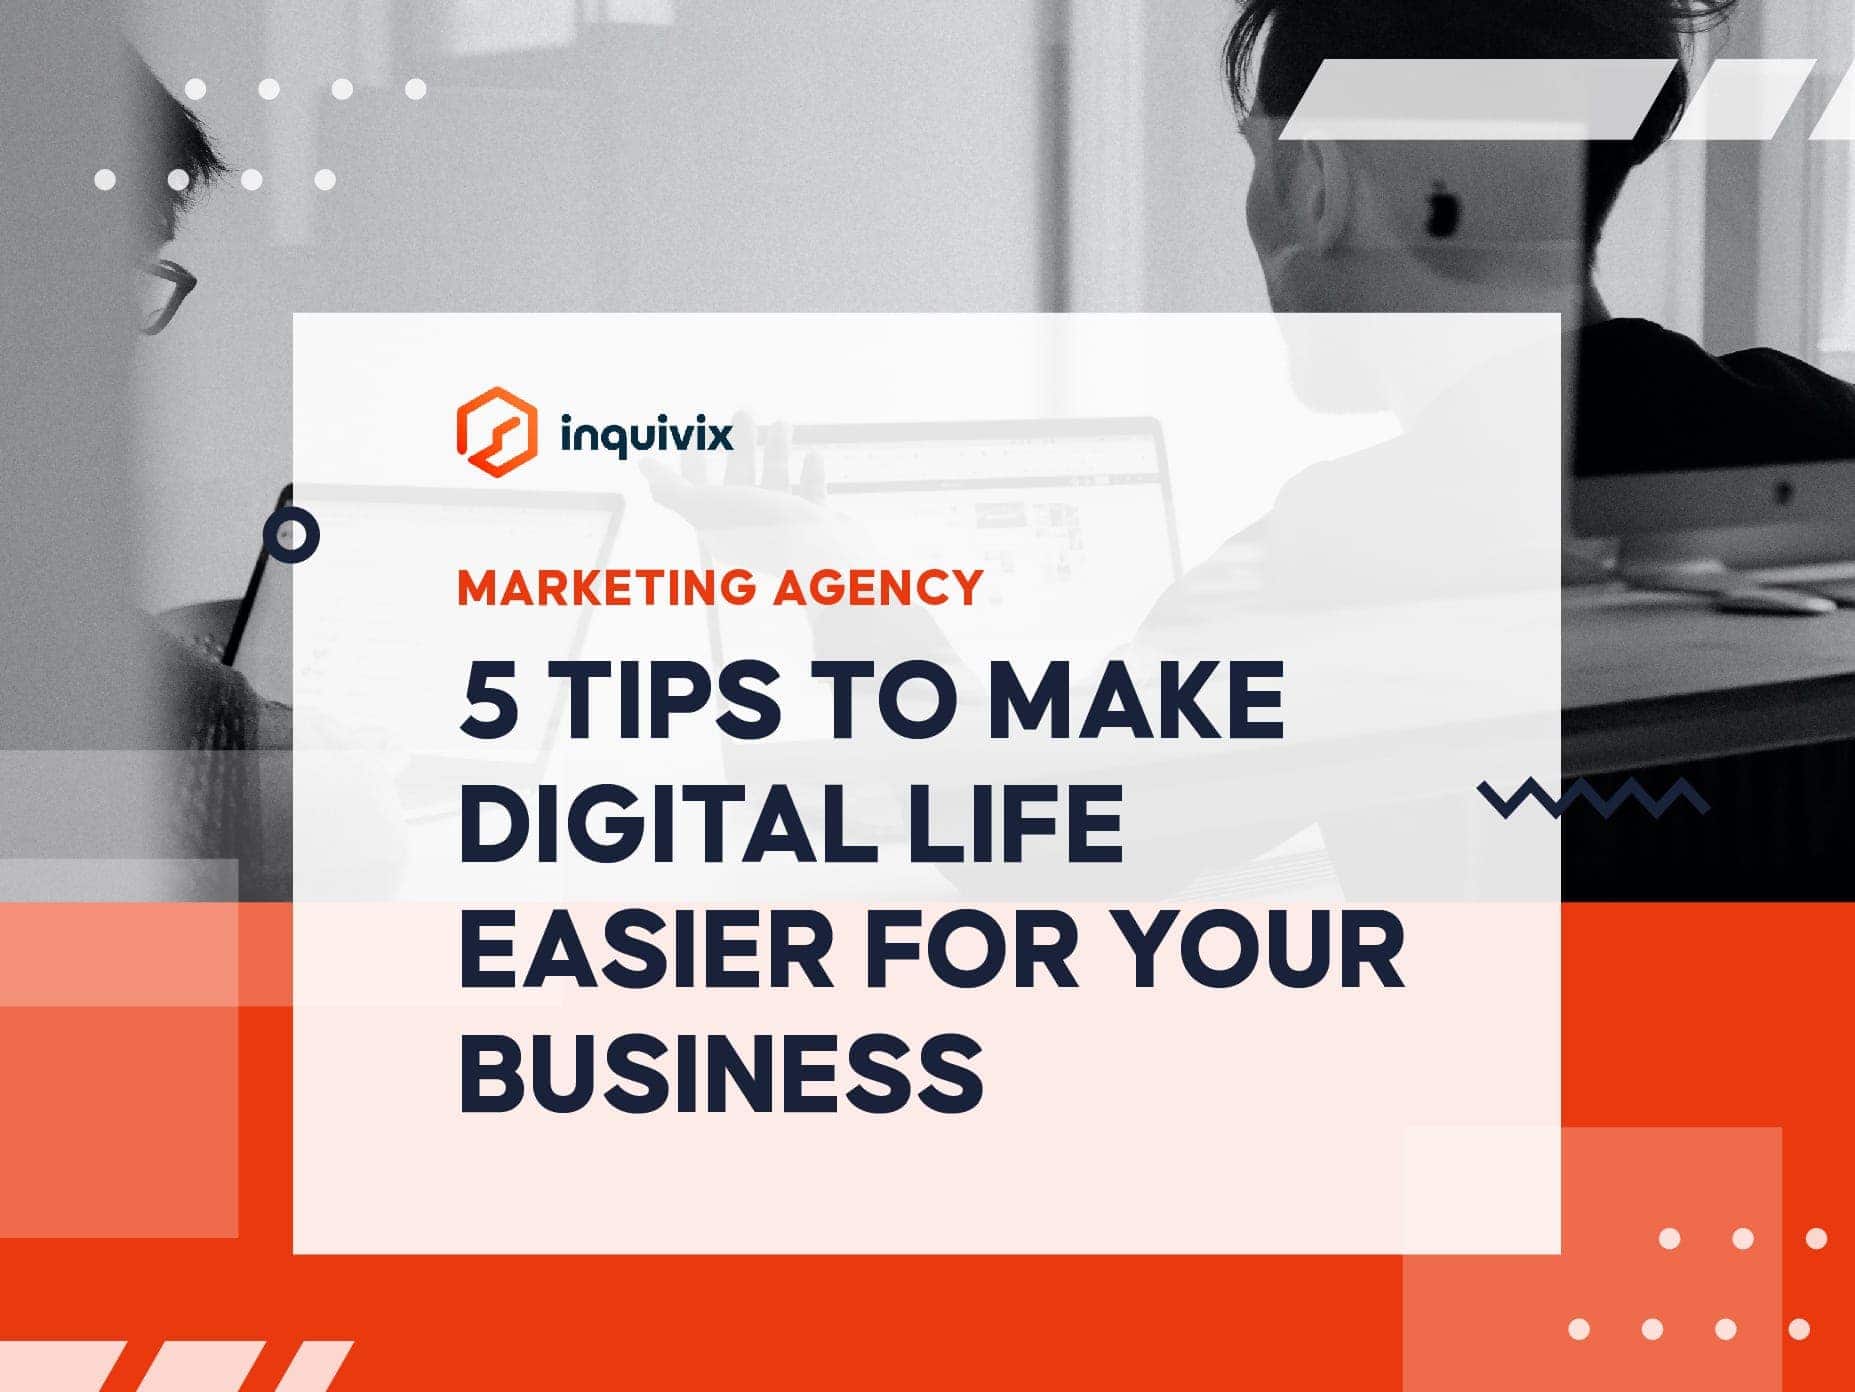 5 tips to make digital life easier for your business